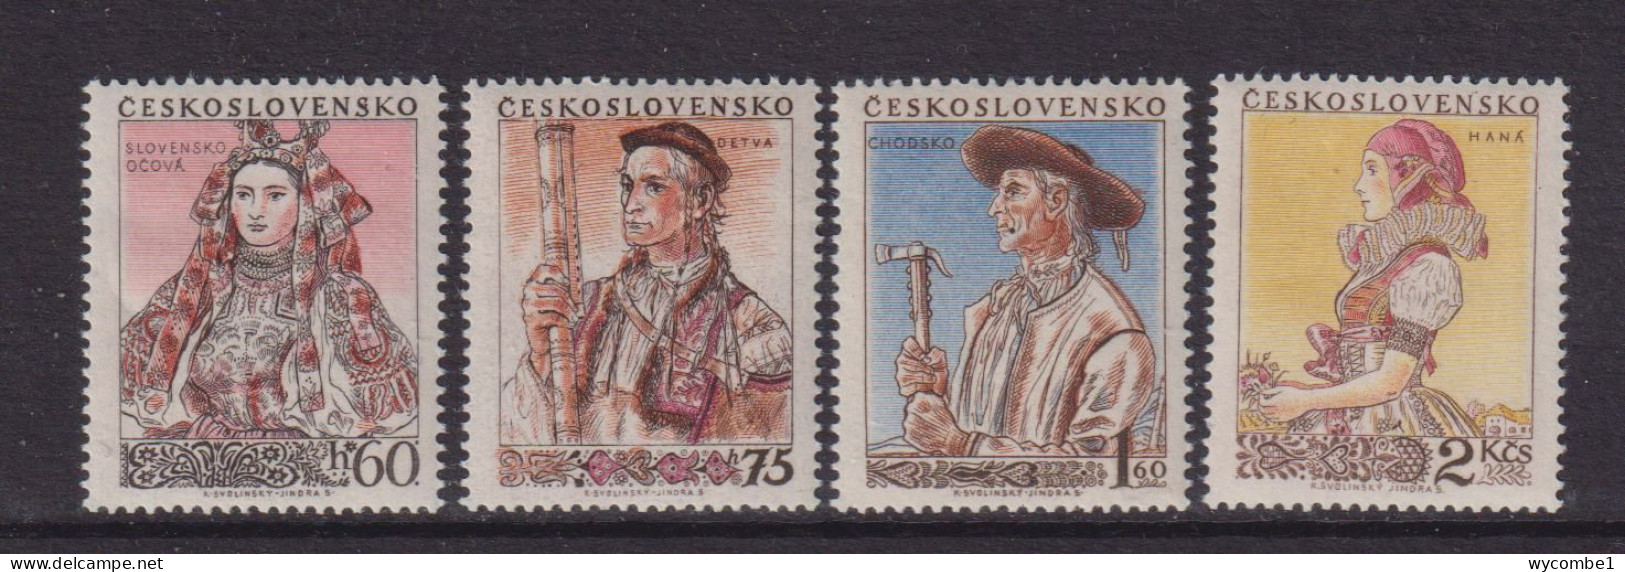 CZECHOSLOVAKIA  - 1955  National Costumes Set  Never Hinged Mint - Unused Stamps